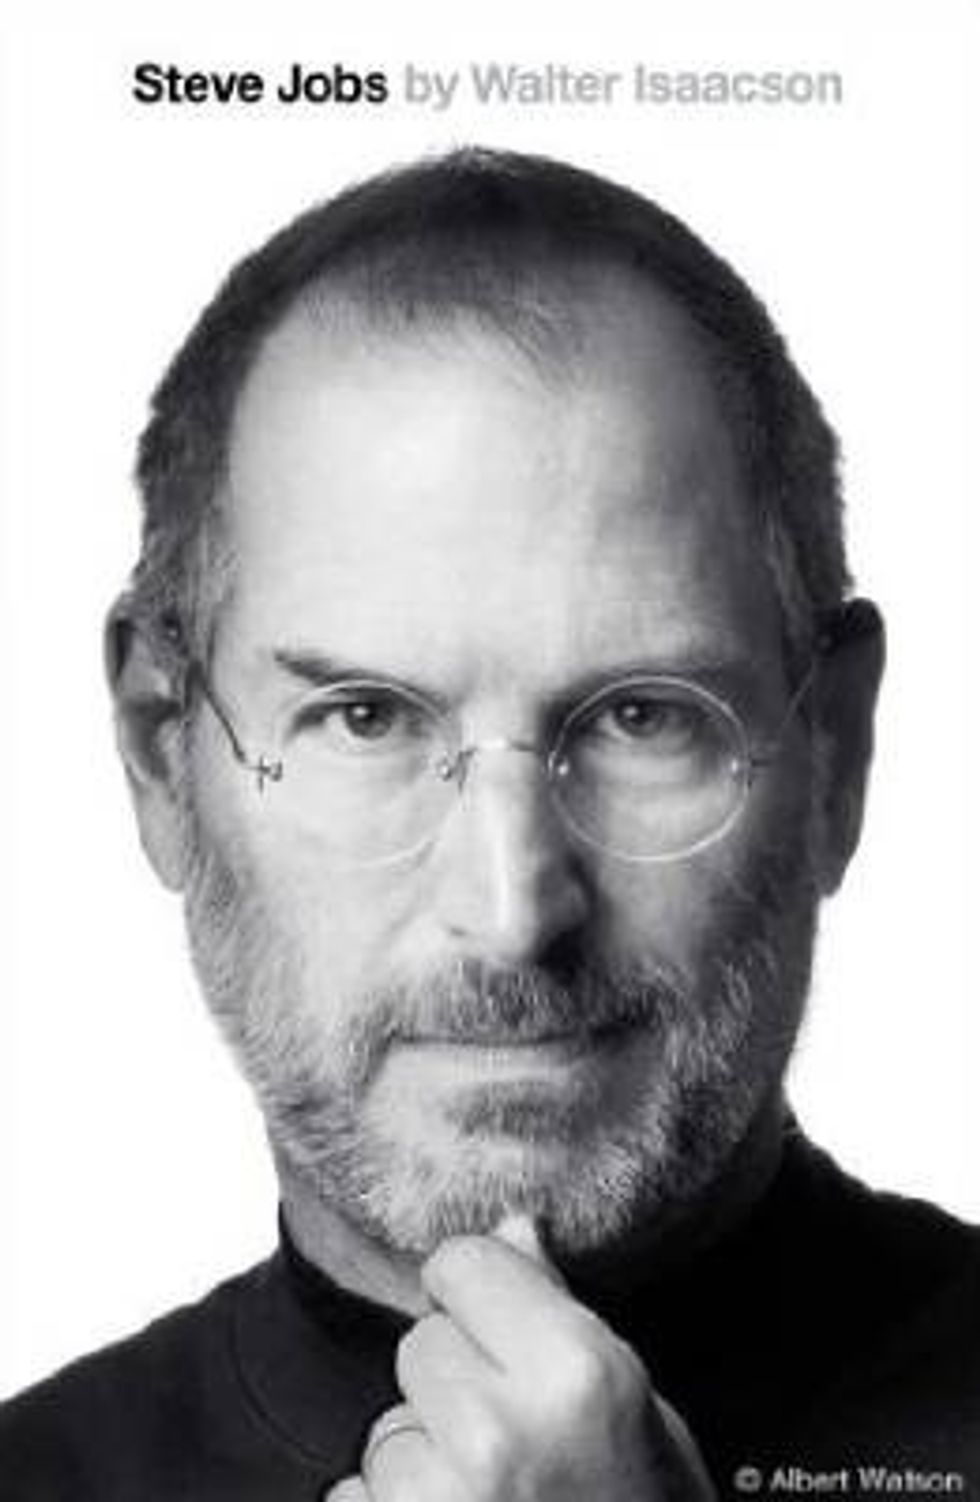 The front cover of the book "Steve Jobs" by Walter Isaacson